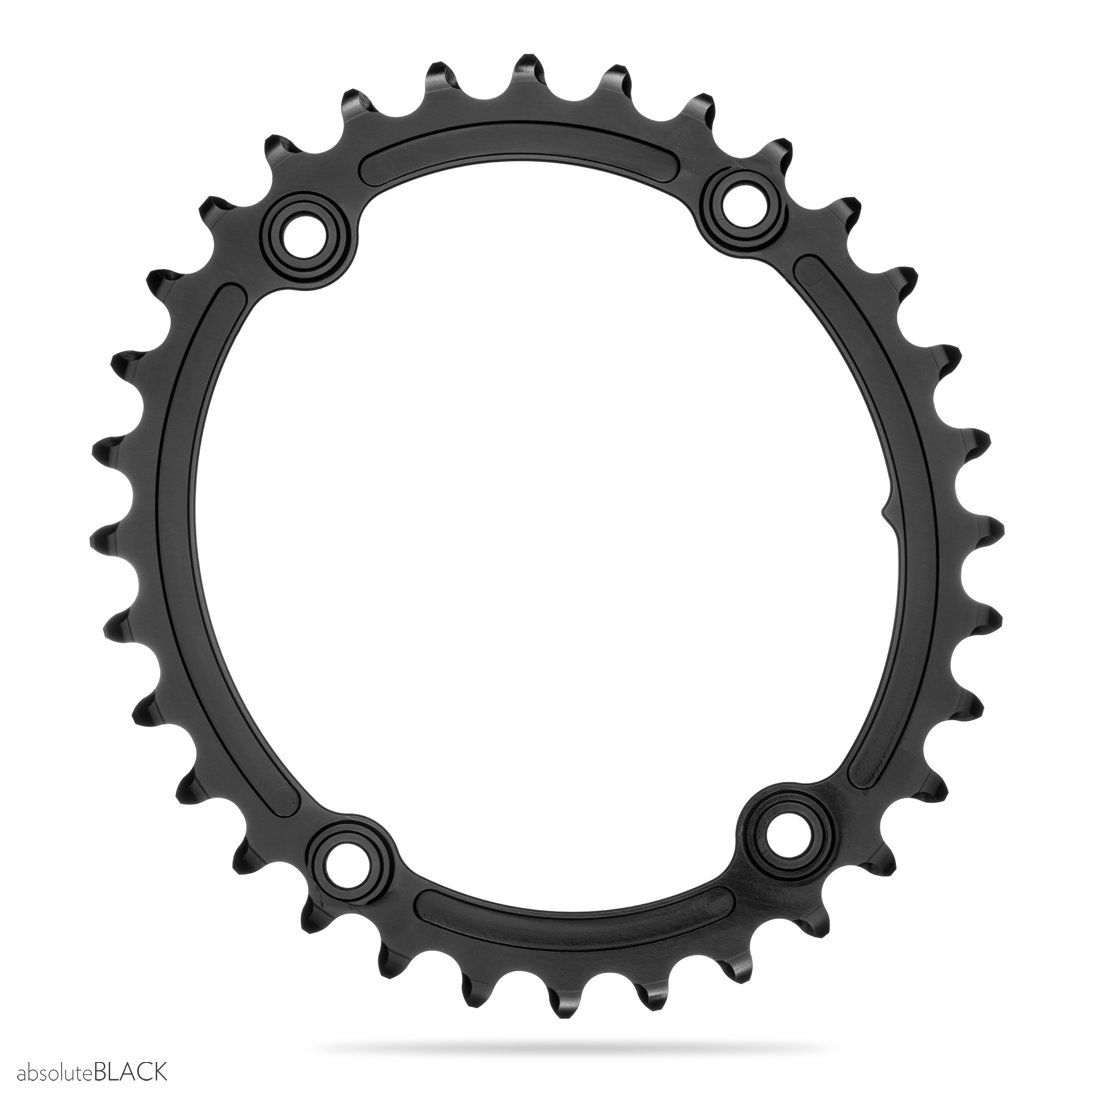 absoluteBLACK | Sub Compact 2X OVAL chainrings 110/4 46/30 & 48/32T